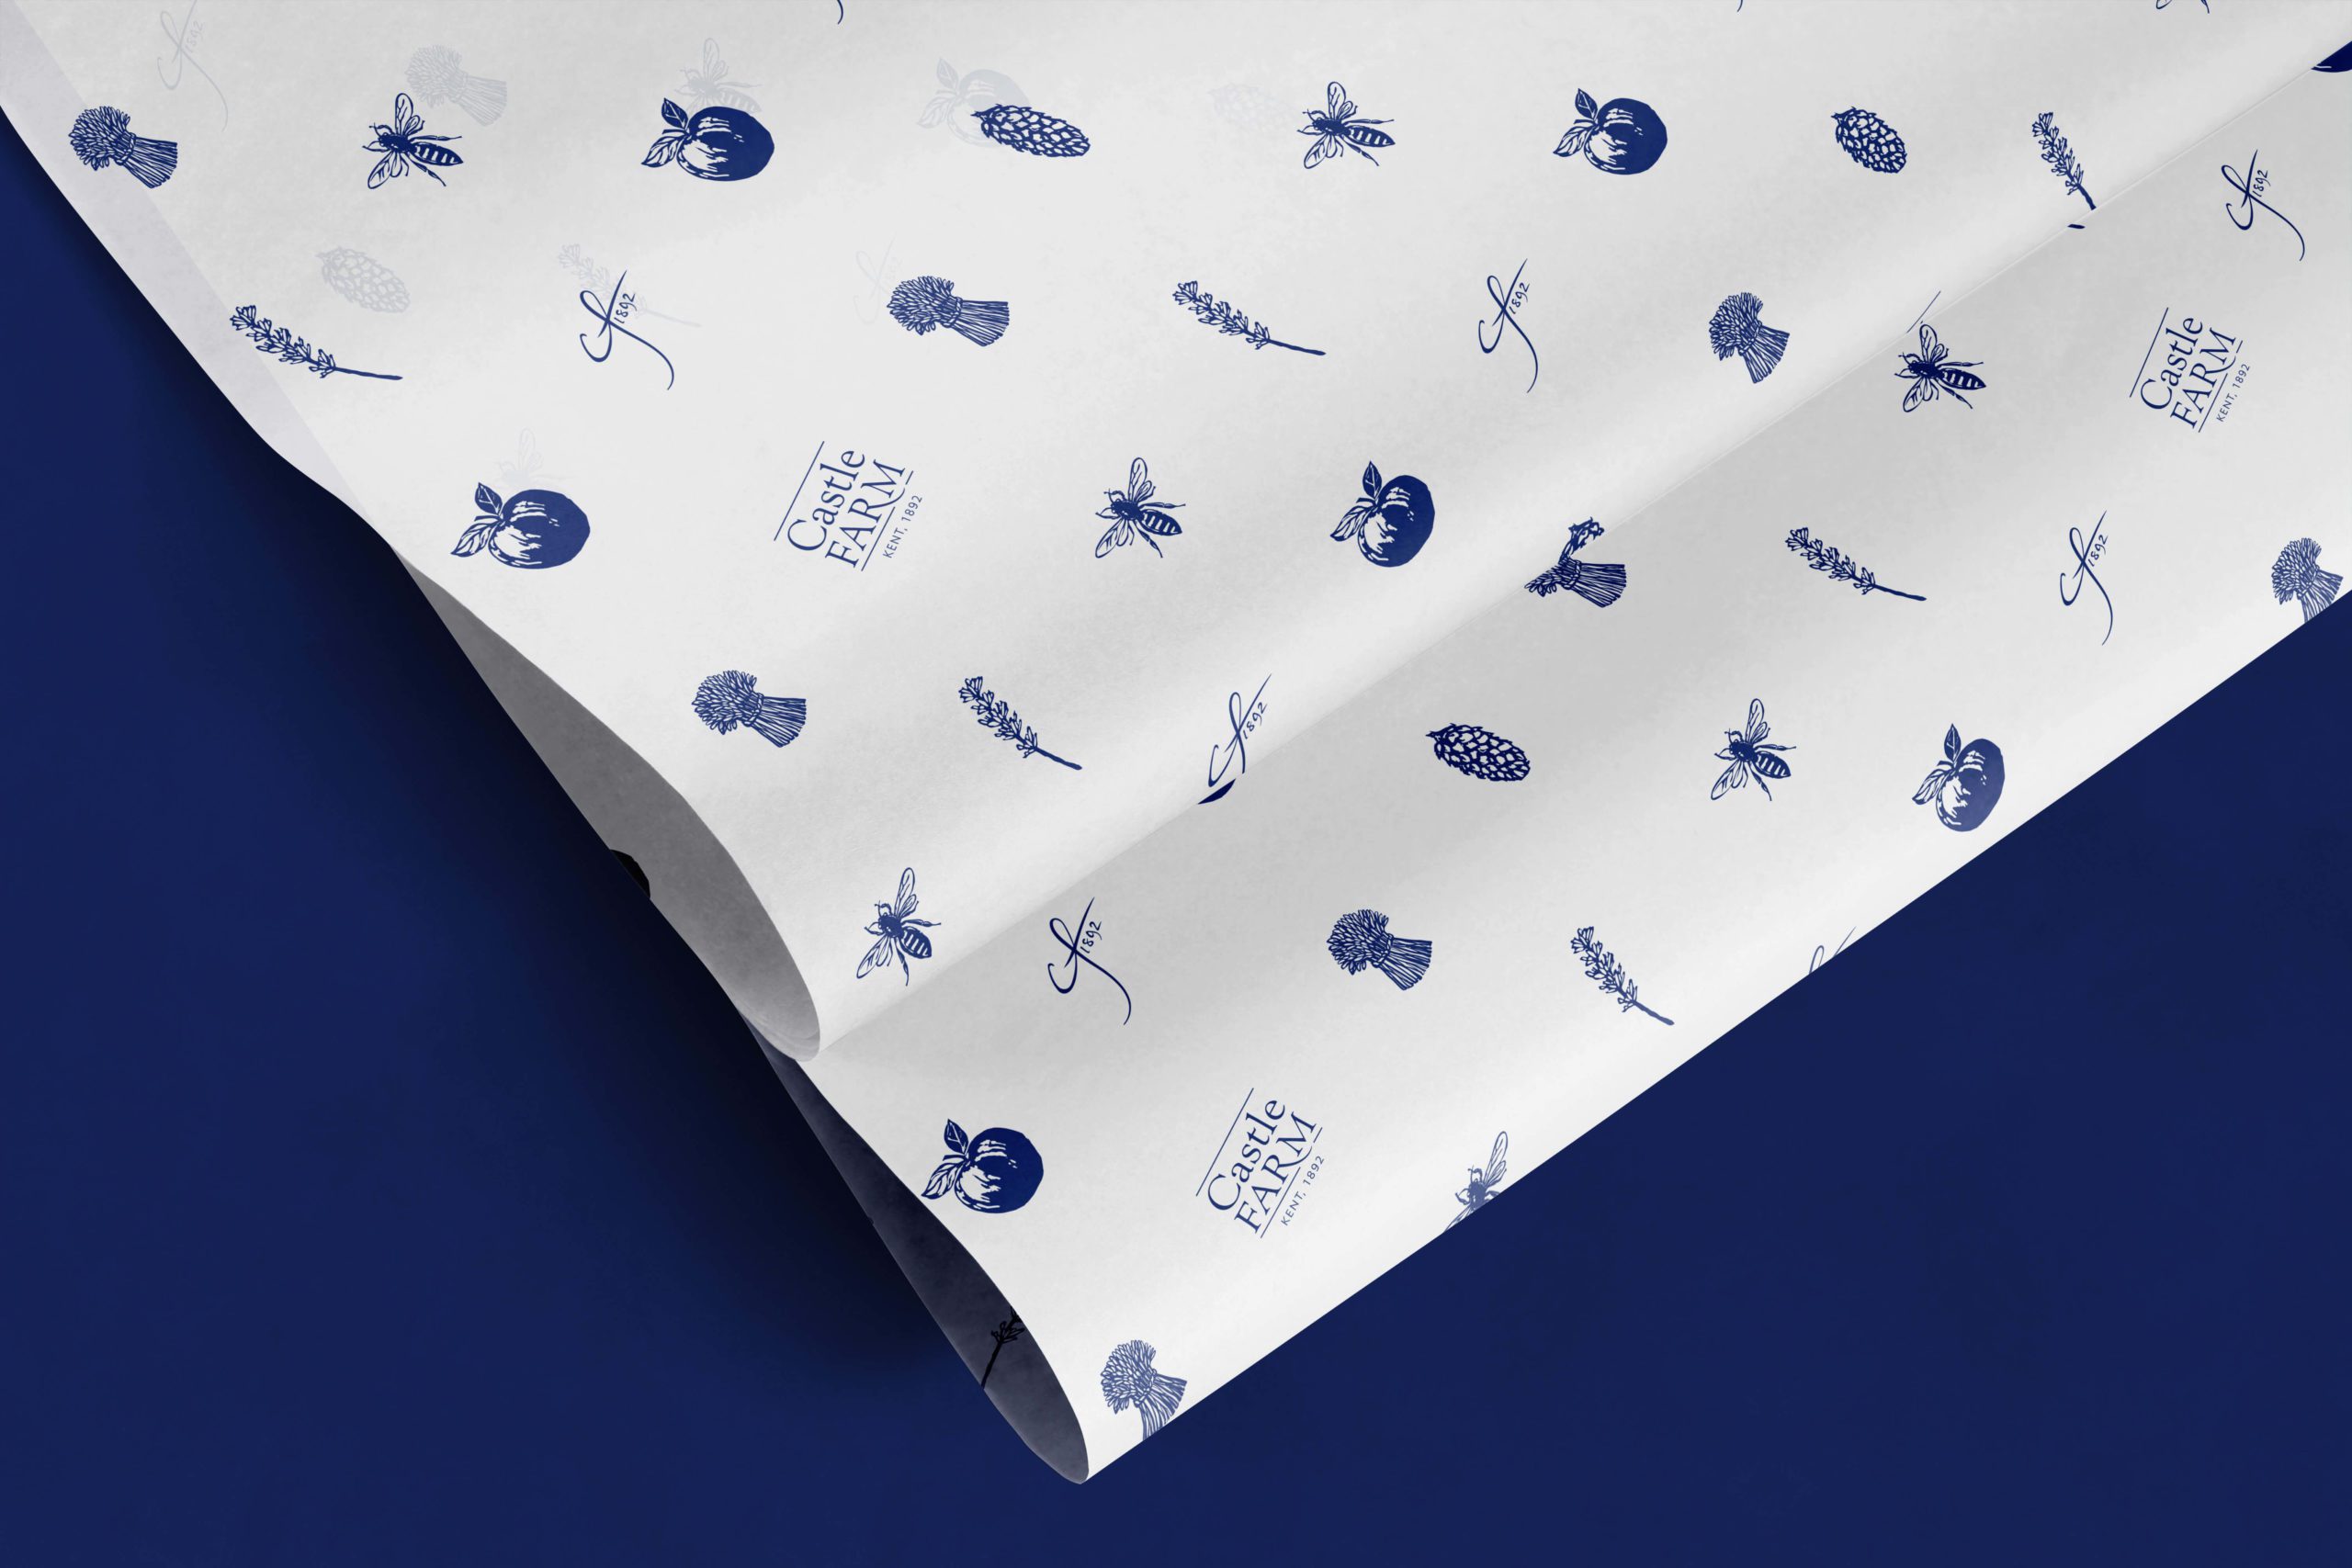 Tissue wrapping paper design for heritage brand, Castle Farm